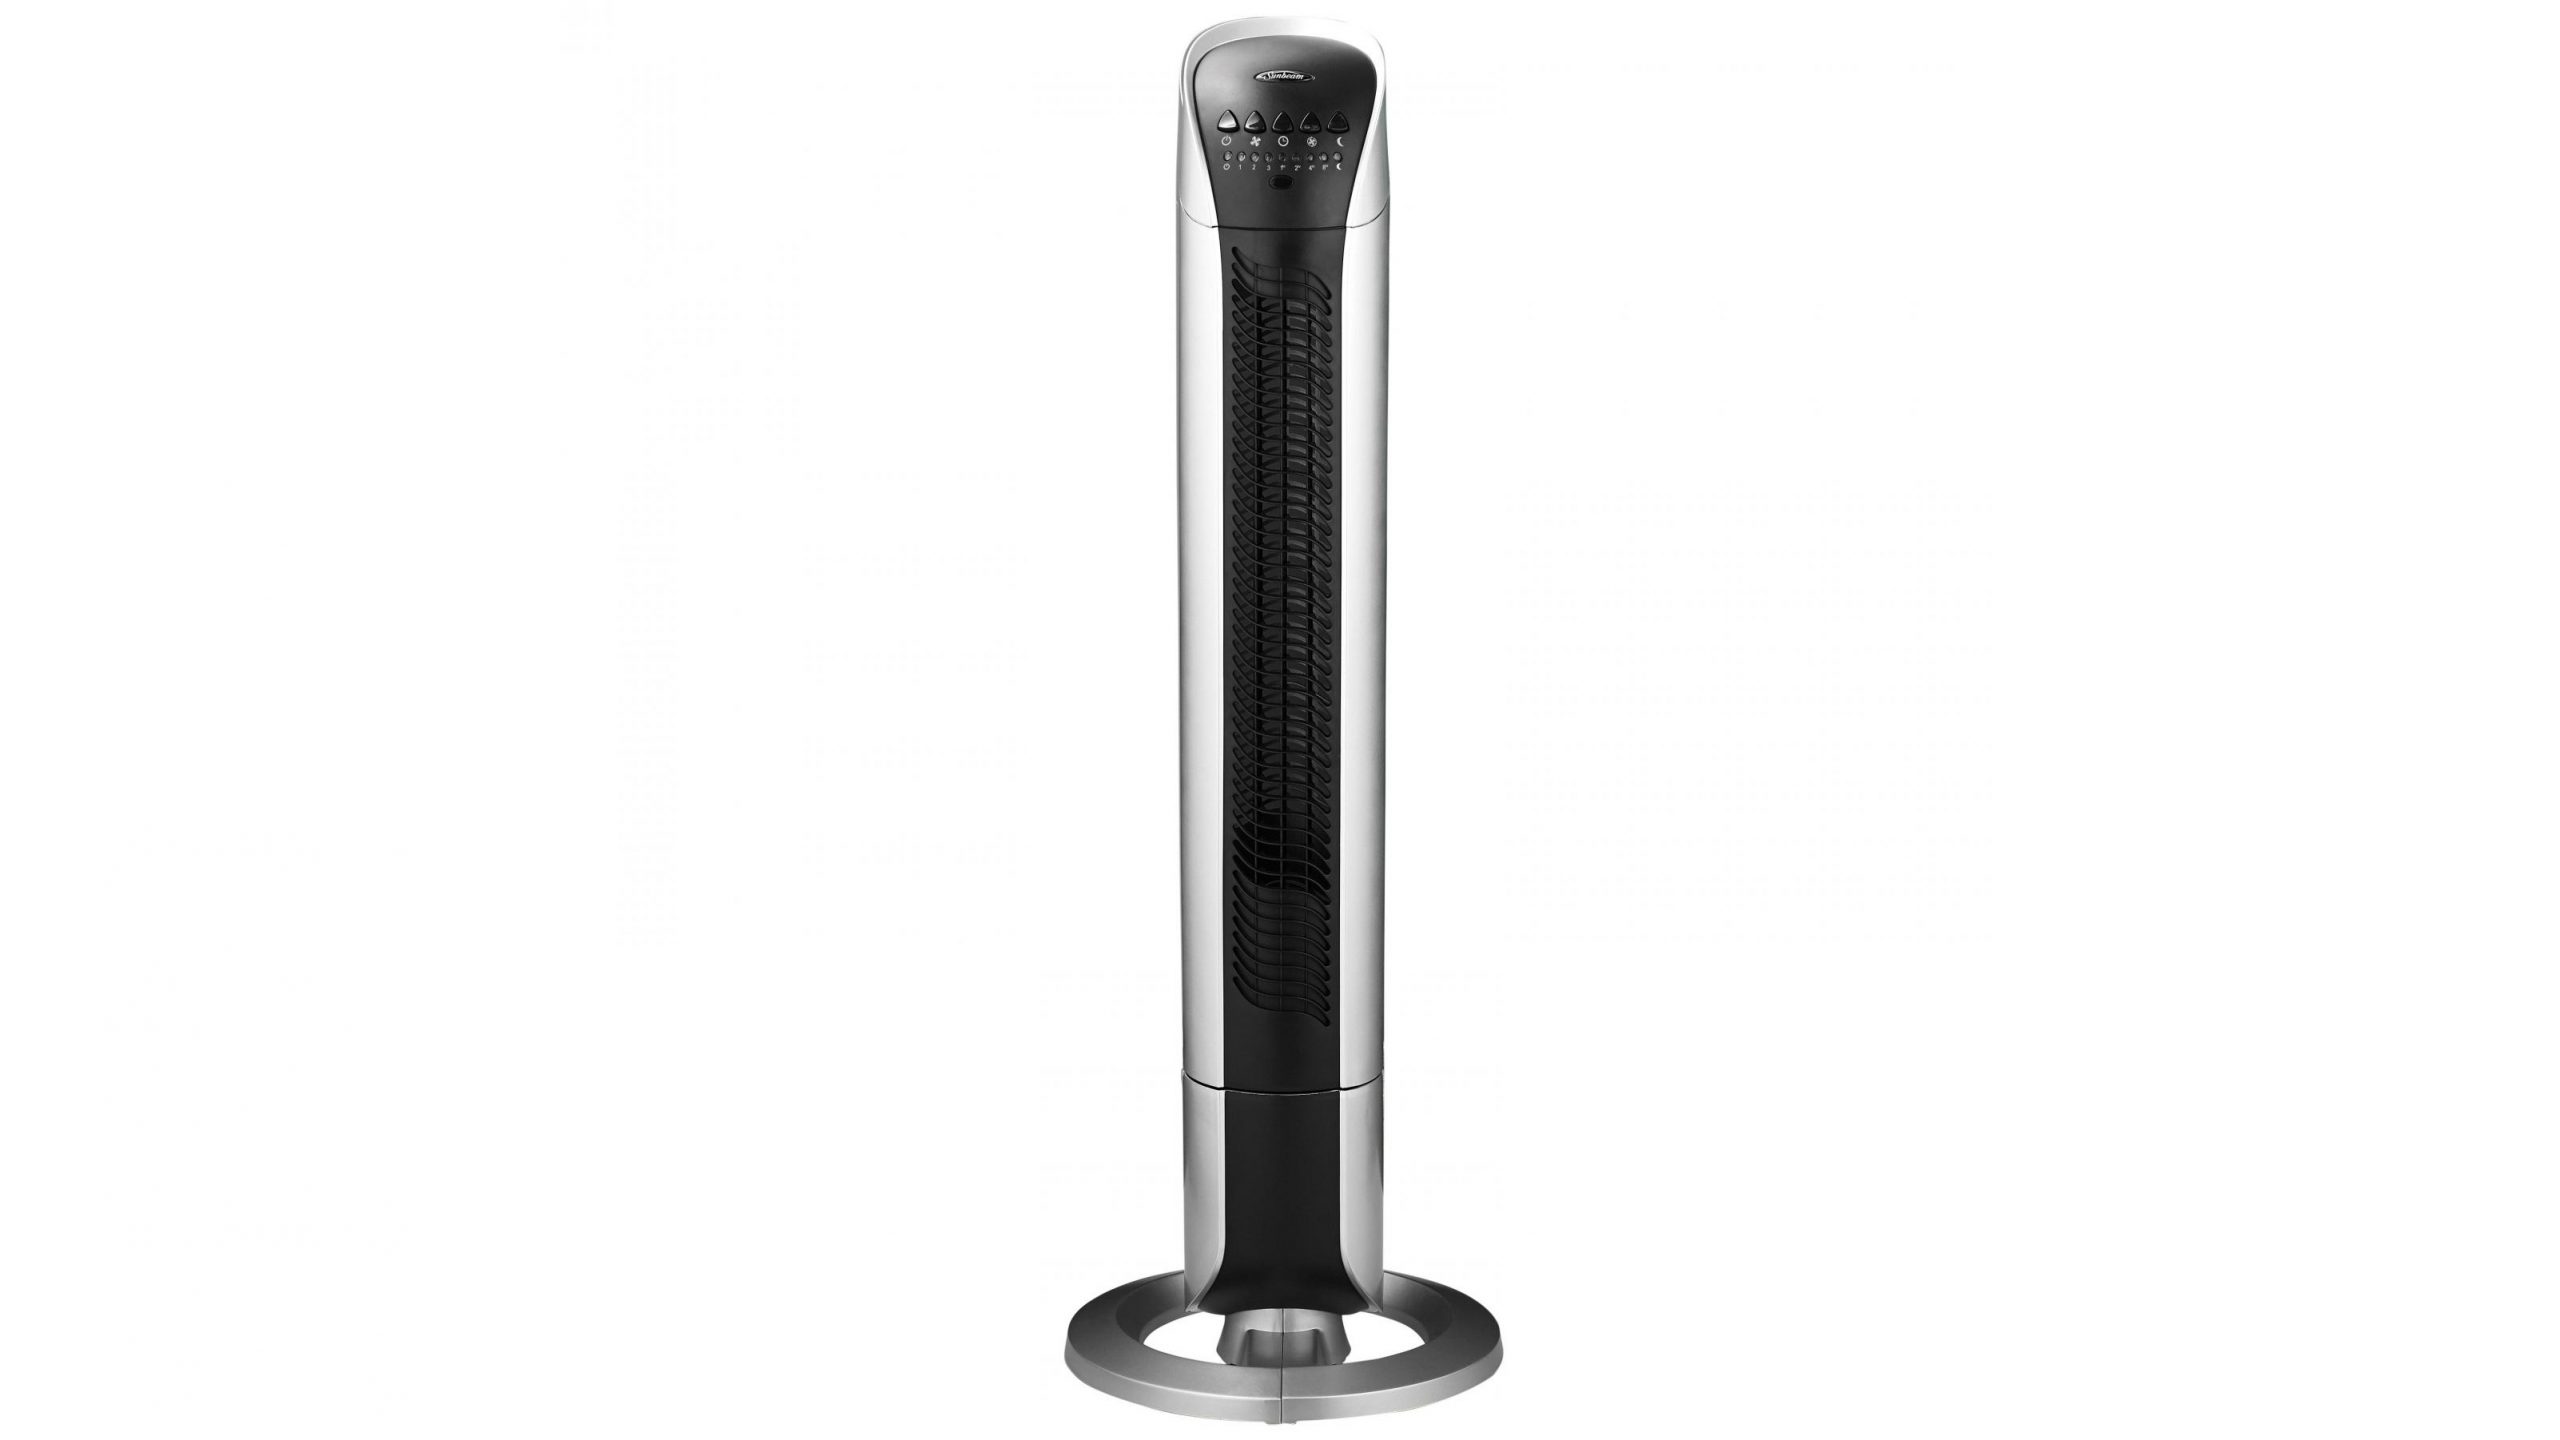 Sunbeam Fa7250 Tower Fan With Night Mode with regard to size 3204 X 1802